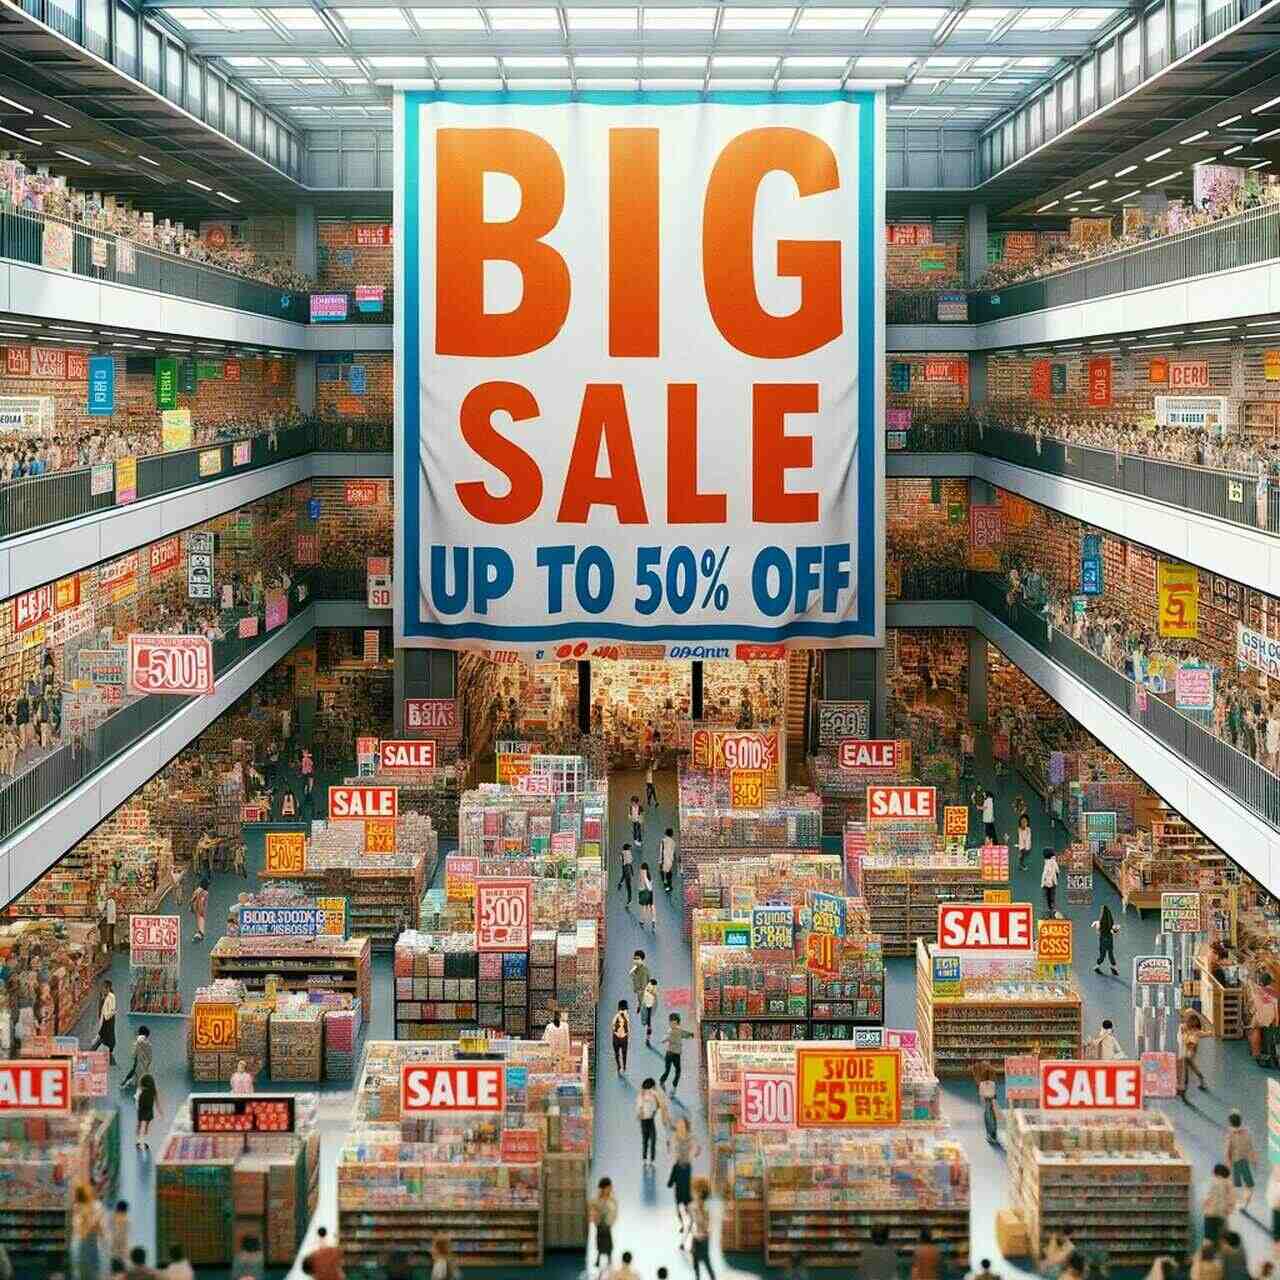 A bustling retail store with a large, colorful discount banner. The banner reads 'Big Sale - Up to 50% Off' and is prominently displayed above the store